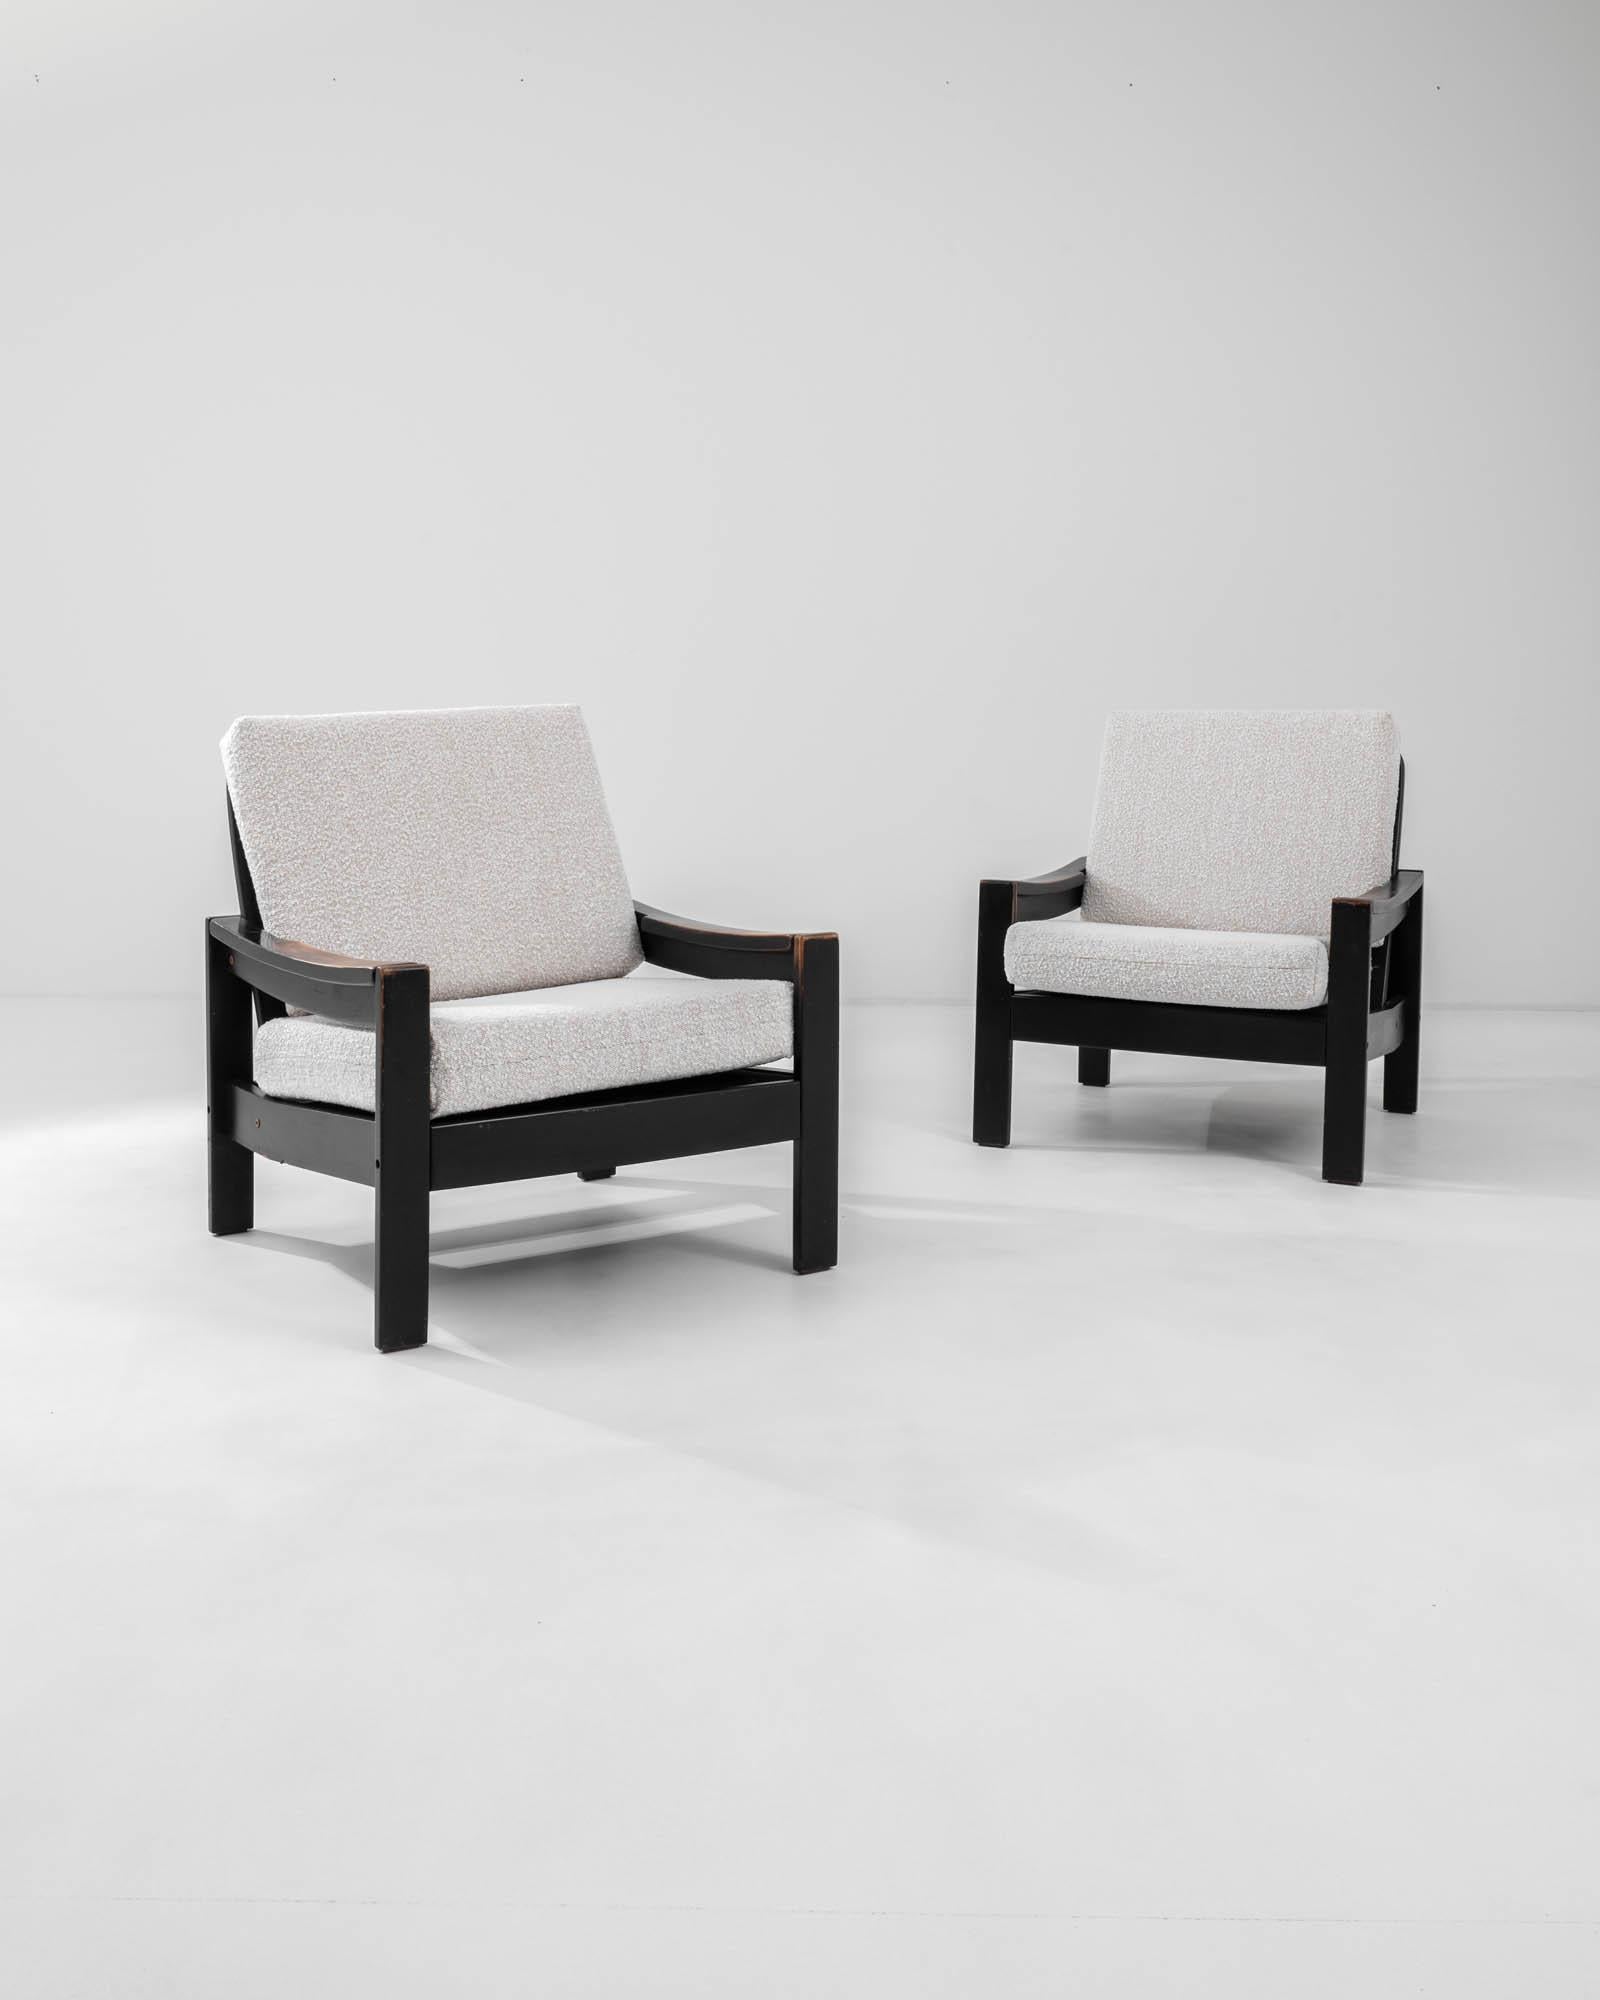 A pair of wooden upholstered armchairs created in 20th century Europe. With a dignified yet relaxed posture, these sumptuous chairs invite one to recline in distinguished style. Created in a classic mid-century design, these chairs exude a cozy yet